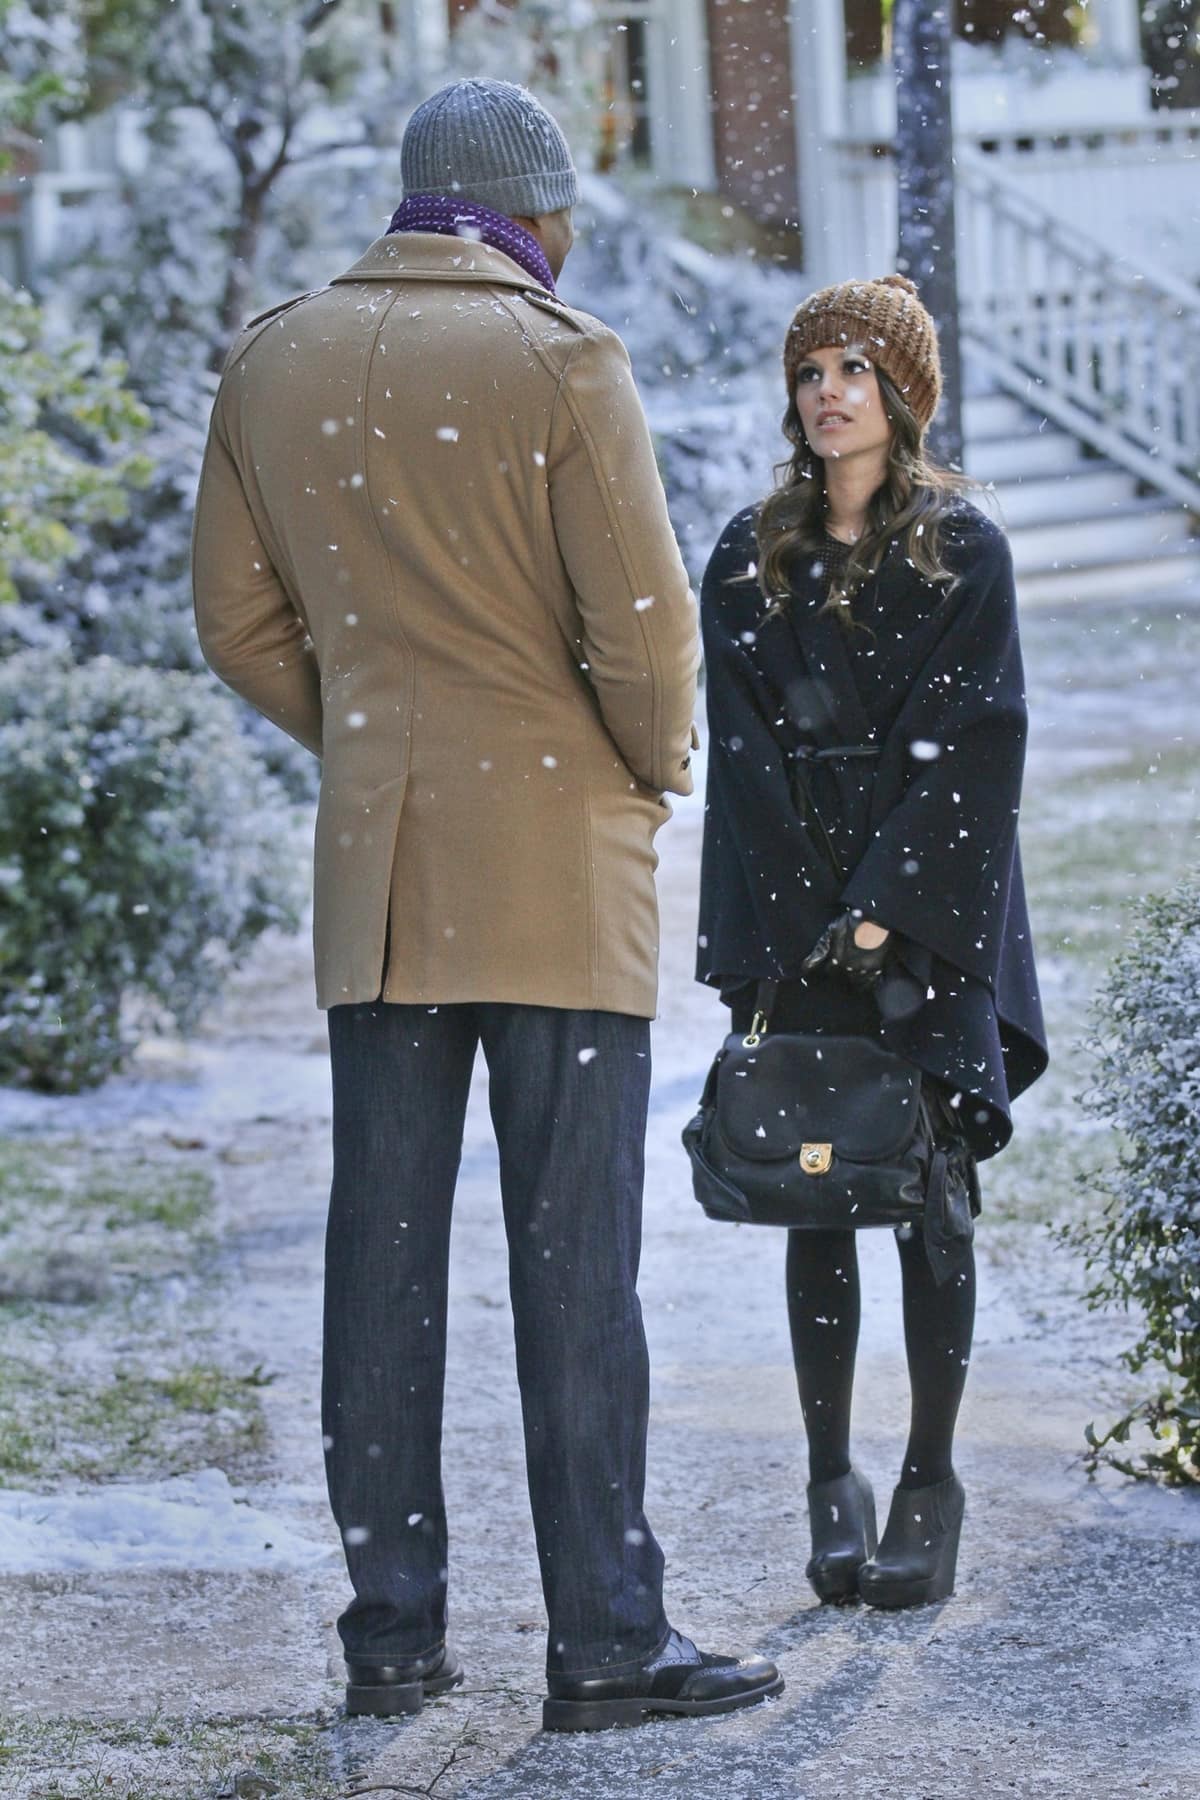 In the "Snowflakes & Soulmates" episode of Hart of Dixie, Dr. Zoe Hart adds a touch of timeless elegance to her wintery look with the black leather Z Spoke by Zac Posen Zac Sac tote